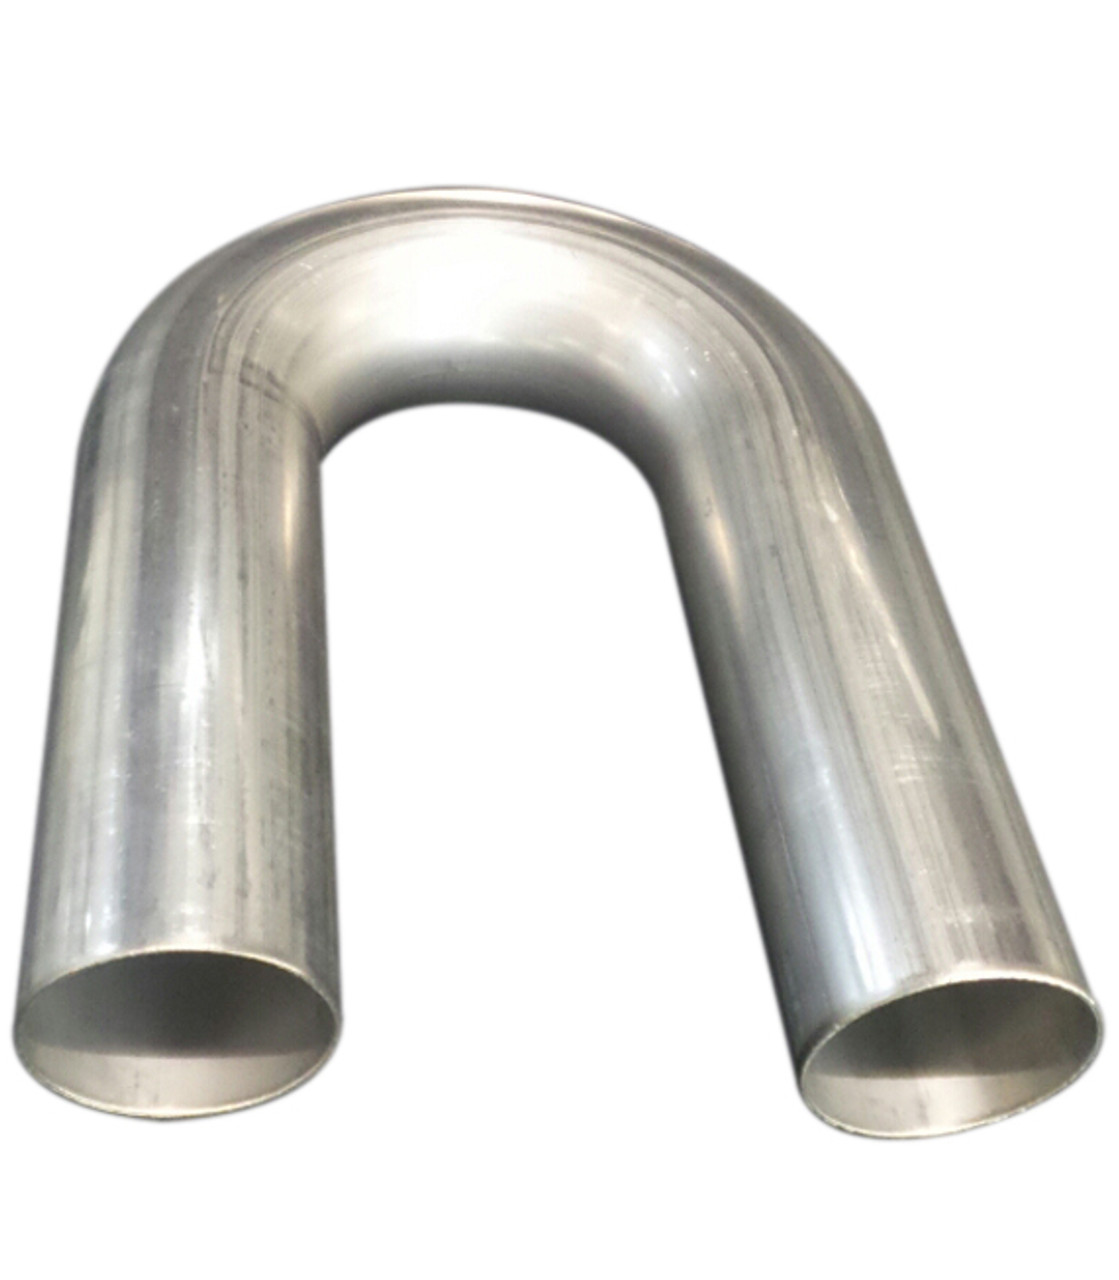 304 Stainless Bent Elbow 3.000  180-Degree